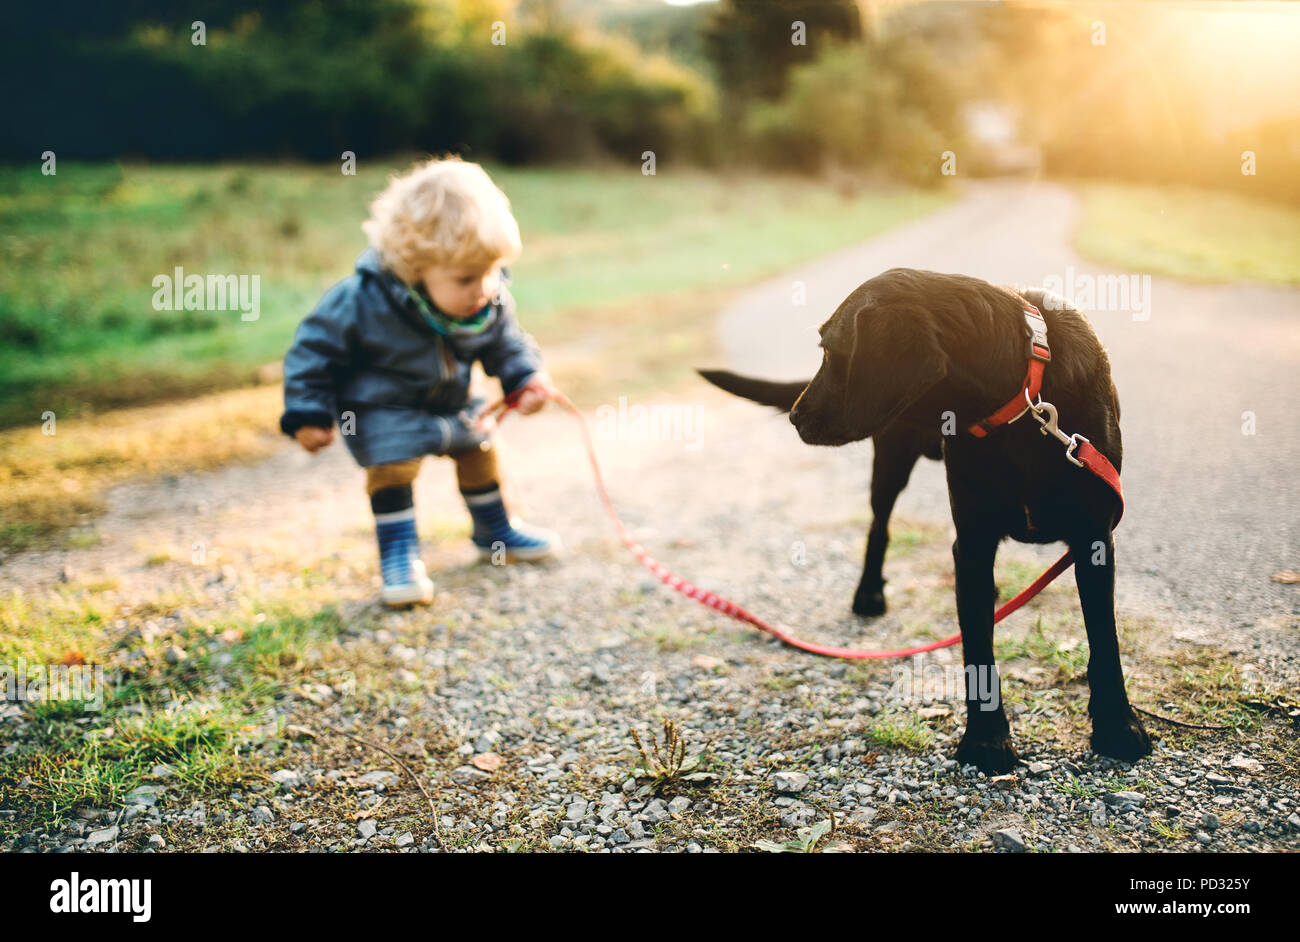 A little toddler boy and a dog outdoors on a road at sunset. Stock Photo